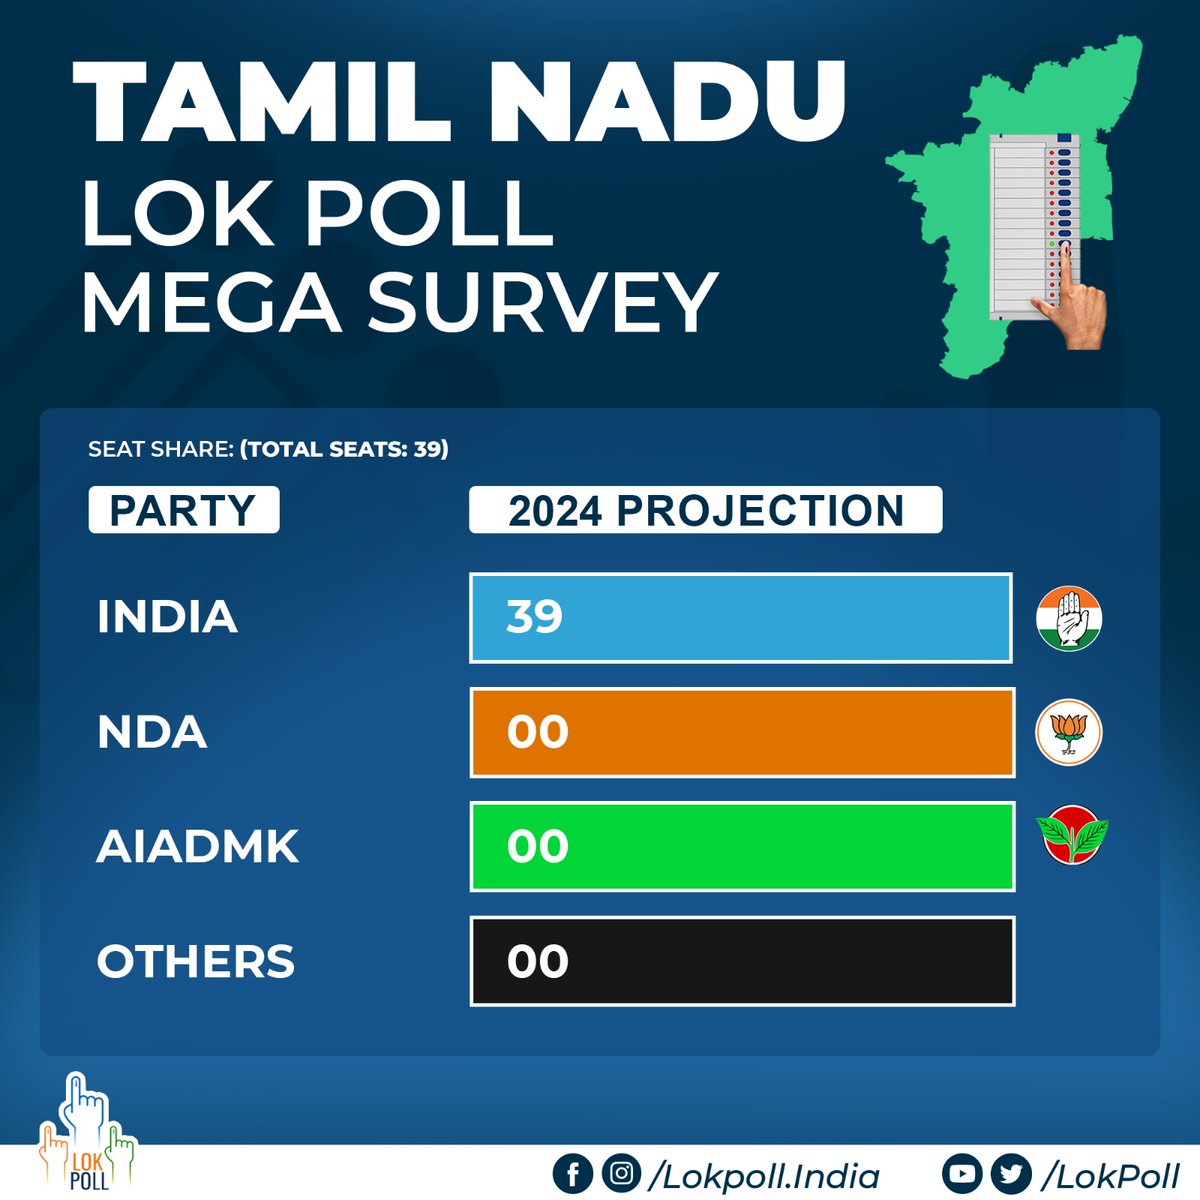 Giving you our final numbers for #TamilNadu, the land of temples. ▪️INDIA 39 ▪️NDA 00 ▪️AIADMK 00 ▪️Others 00 Sample size: 1,350 per Parliamentary constituency. #LoksabhaElections2024 #Elections2024 #LokSabhaElections #GeneralElections2024 #INDIA